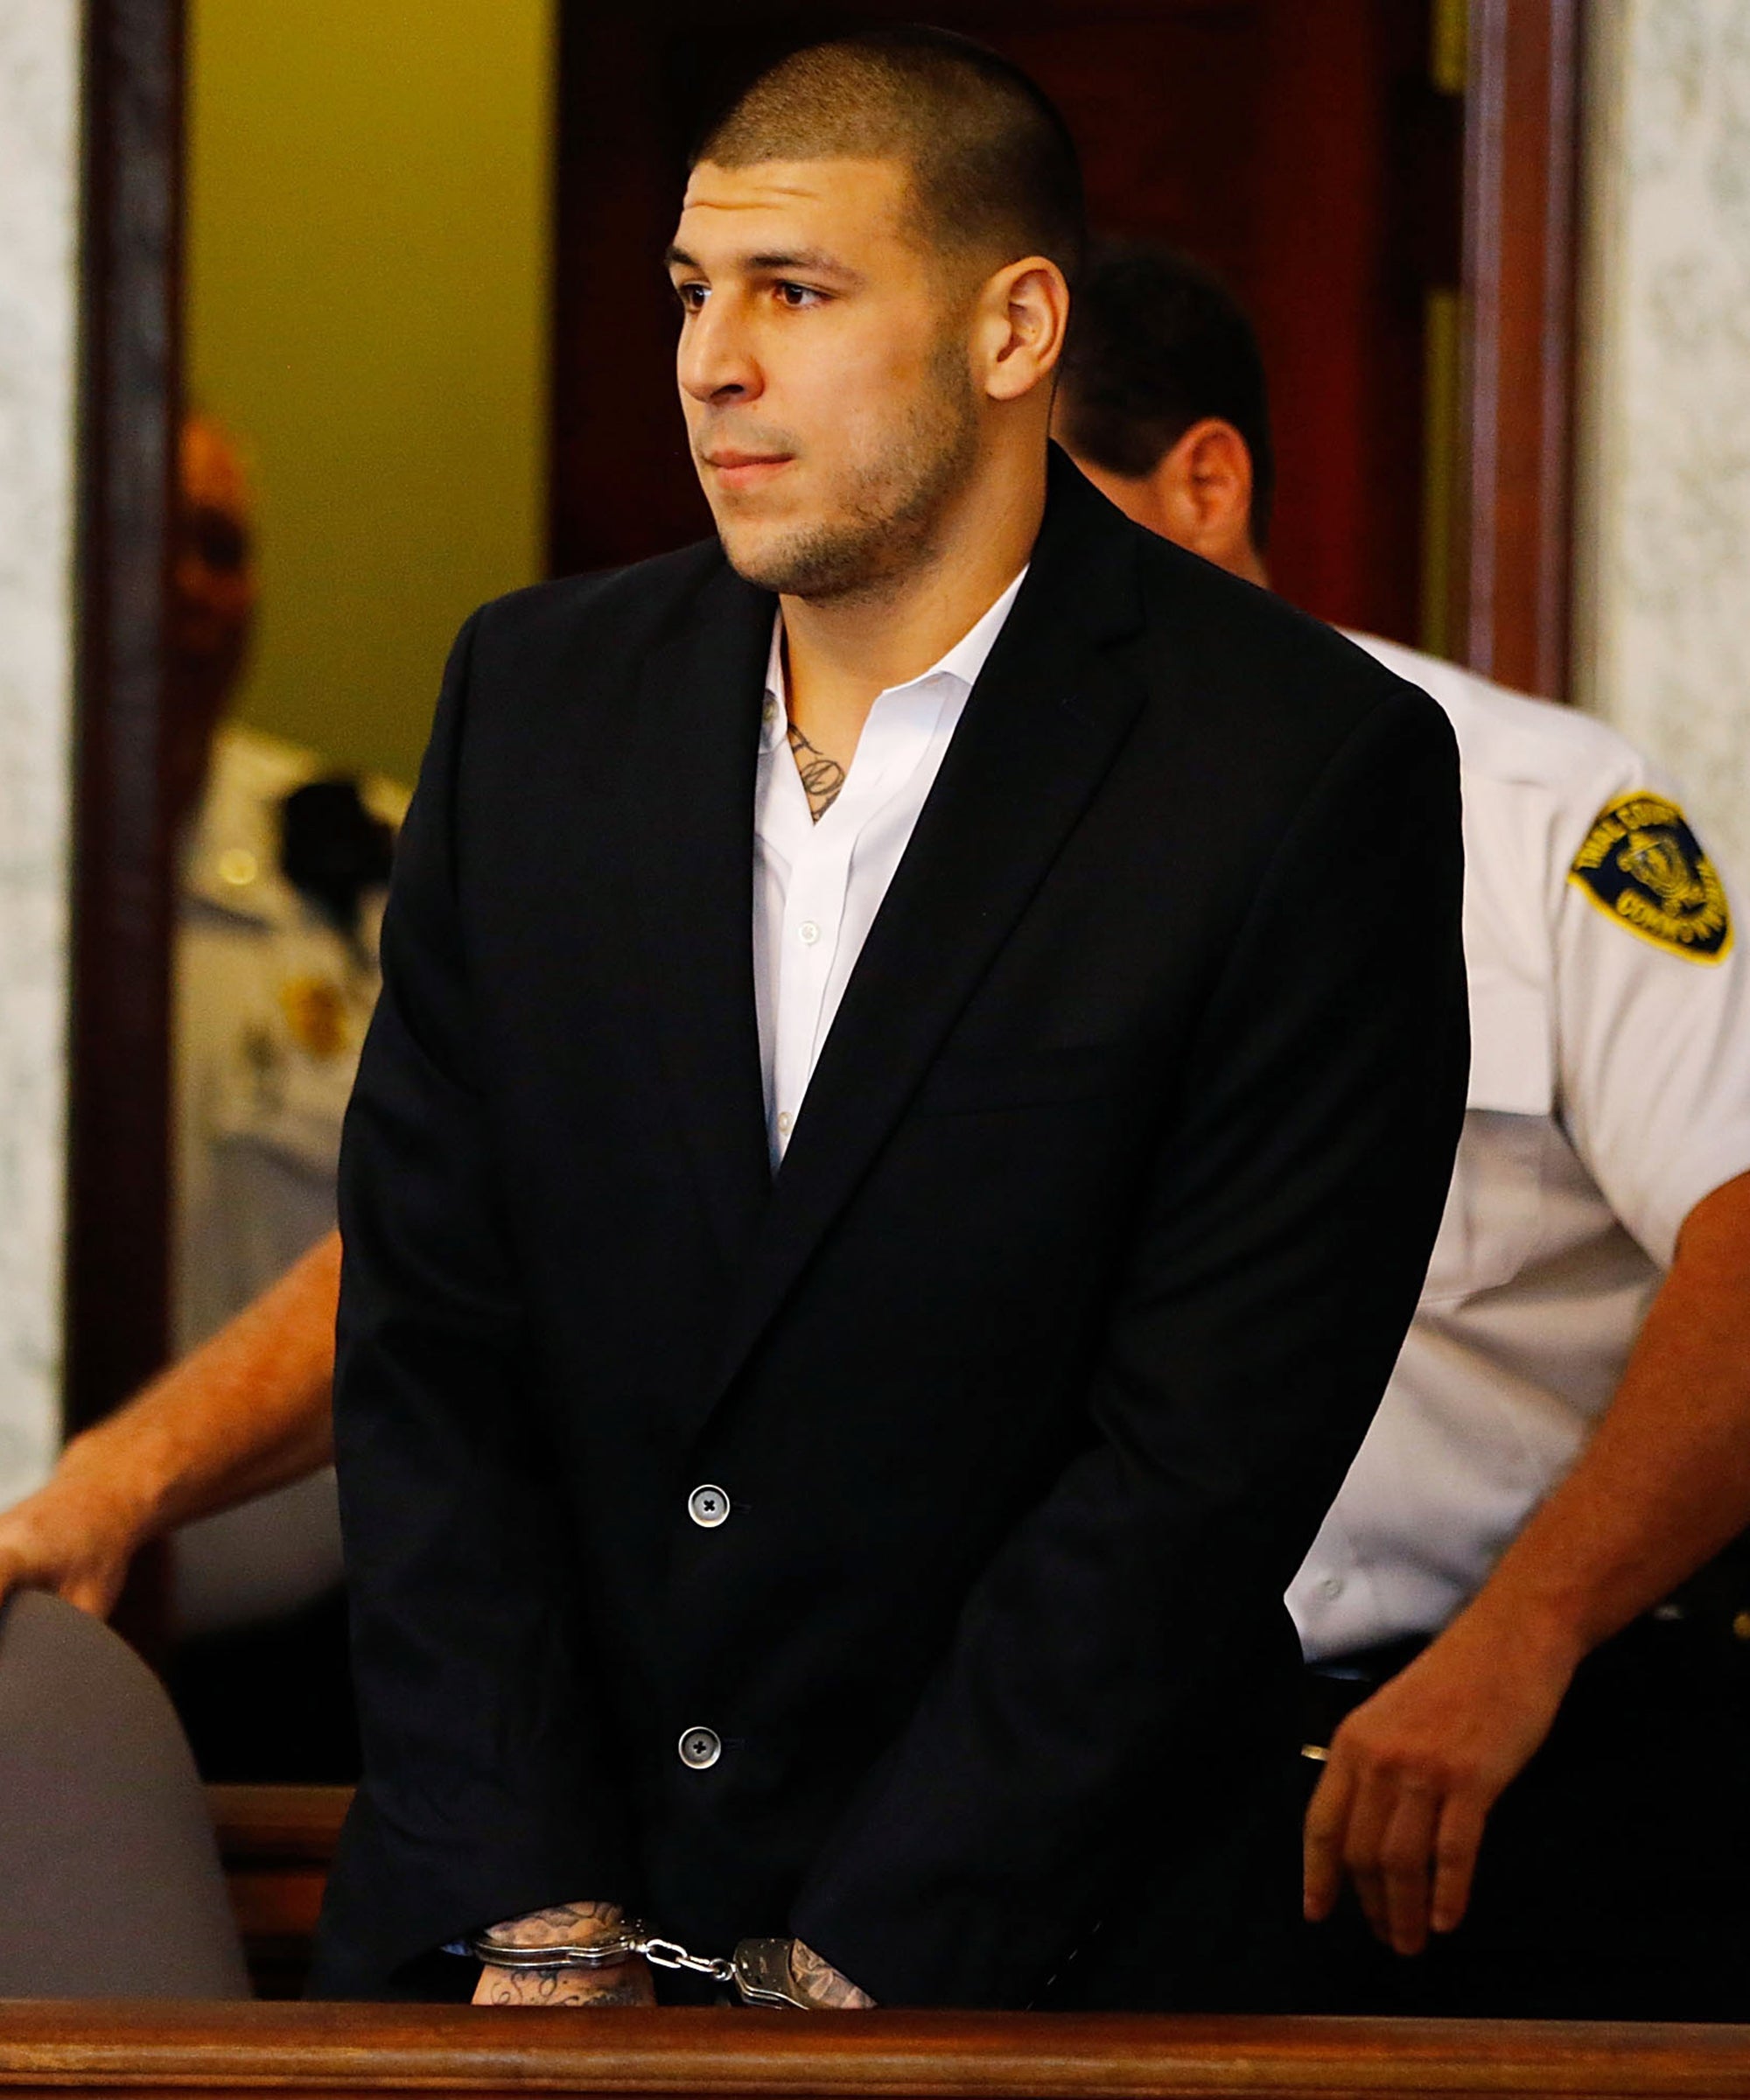 Aaron Hernandez's path could have gone off course - The Boston Globe